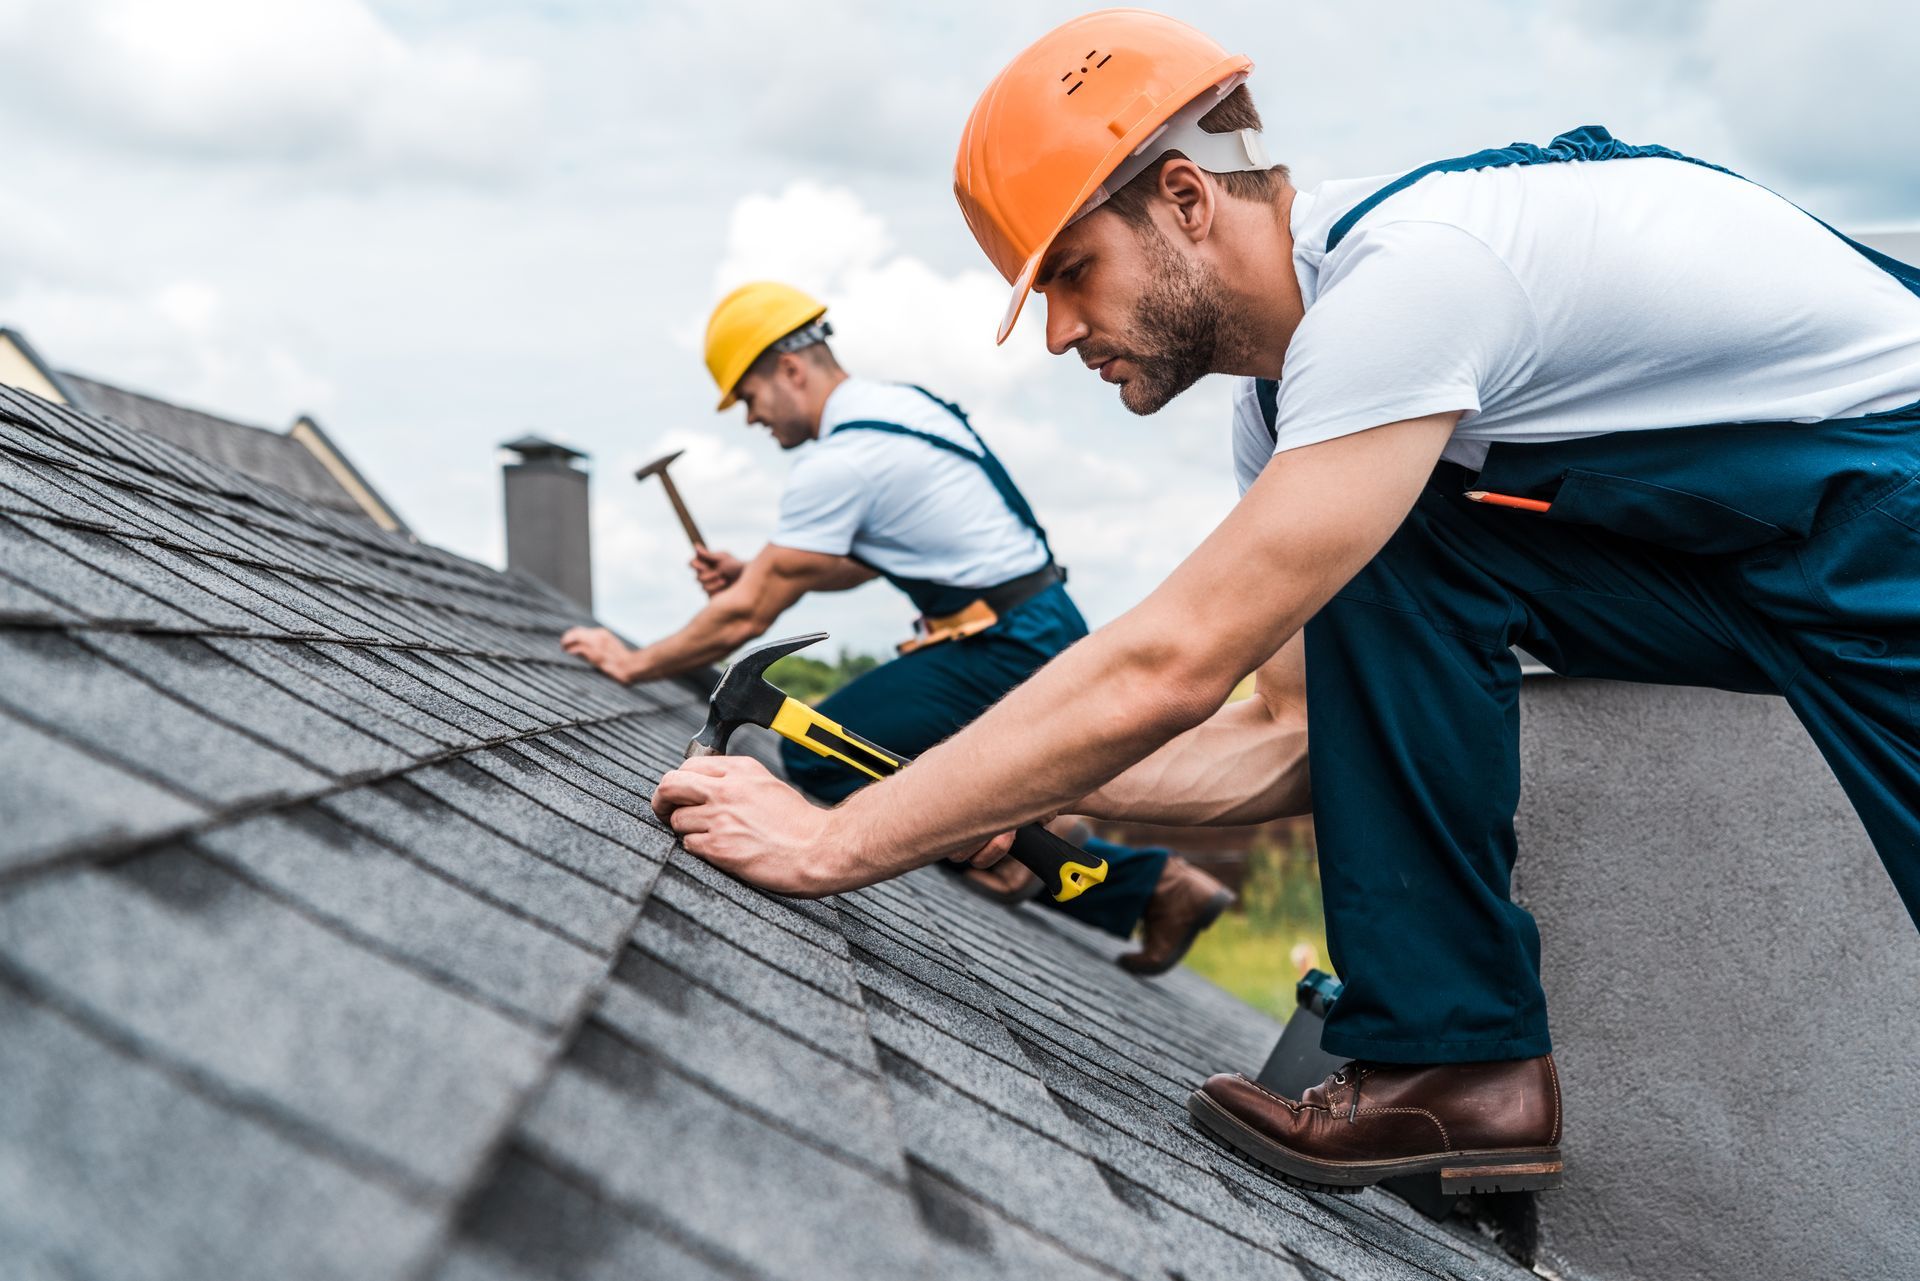 Roofers on a house, nailing shingles to the house. Hoping their employer has Georgia roofing insurance coverage.